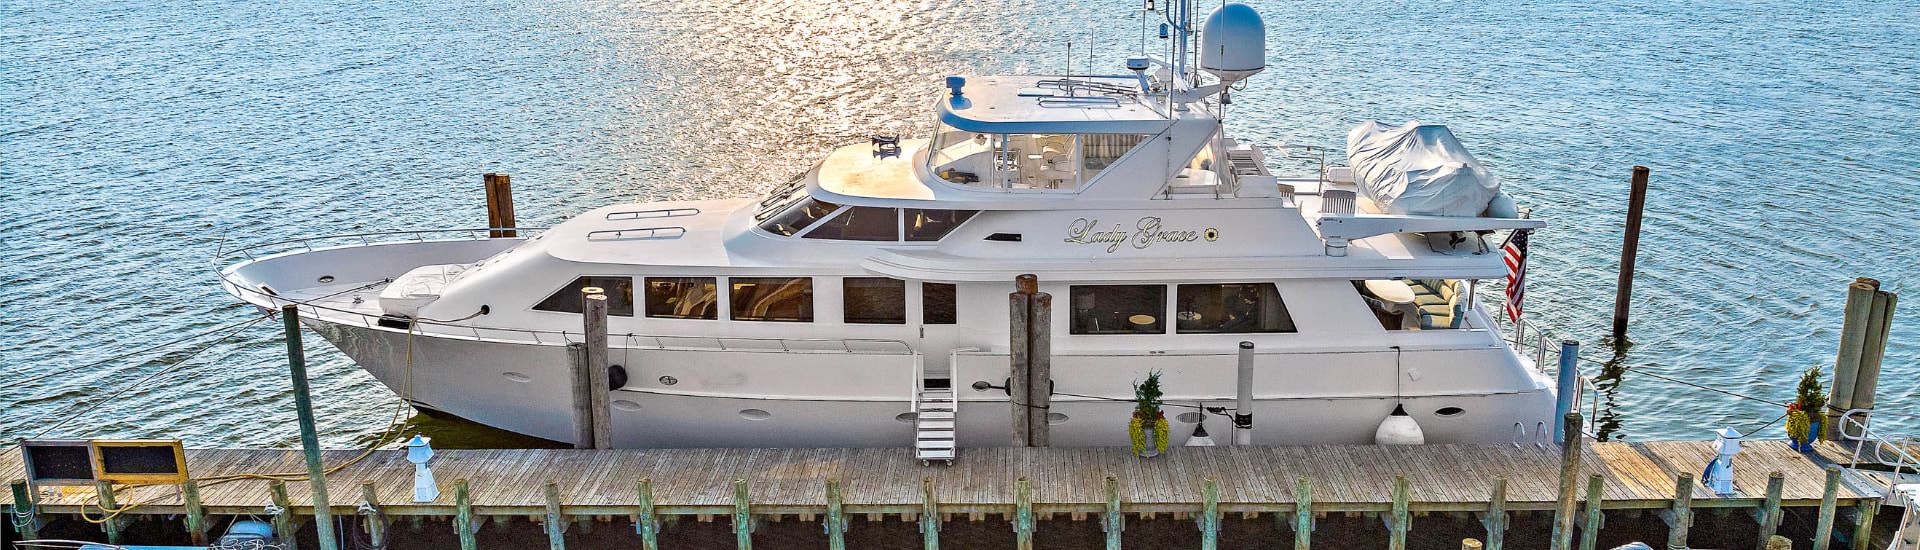 92-foot white yacht named Lady Grace on the water